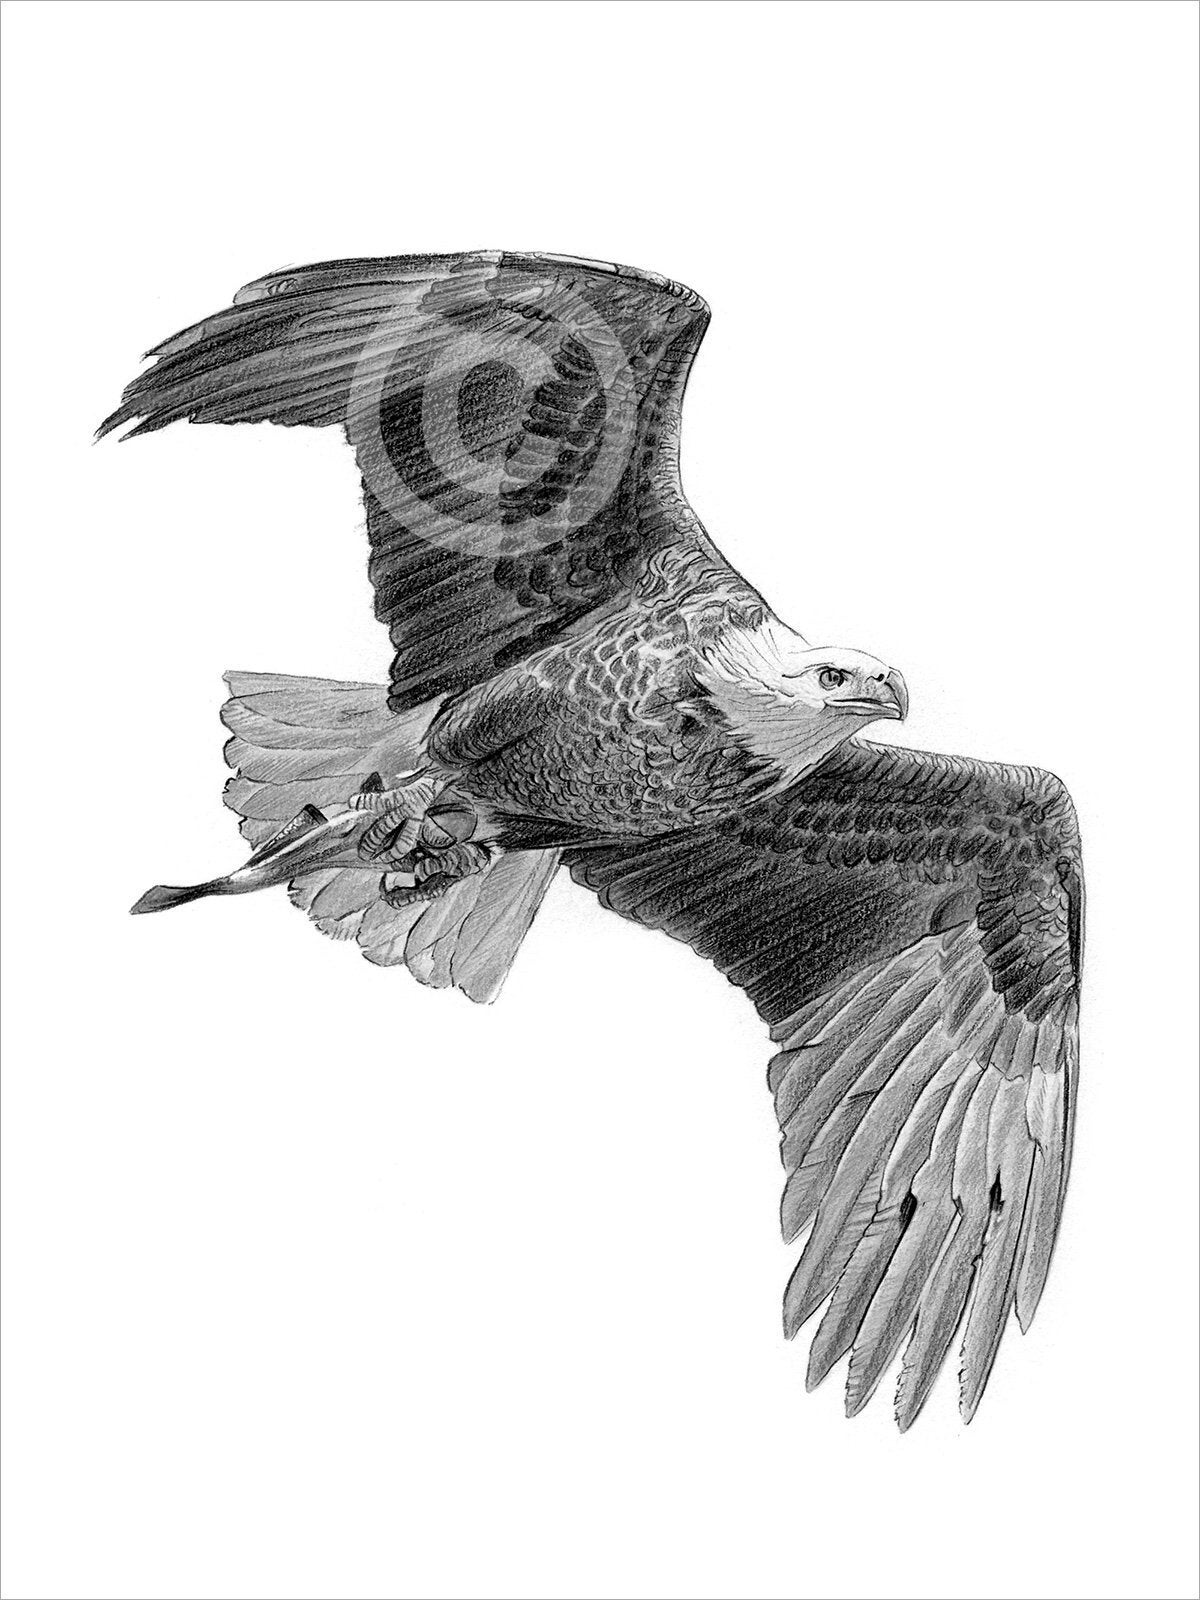 Buy Eagle in Flight Artwork Bald Eagle Pencil Drawing Print Online in India   Etsy